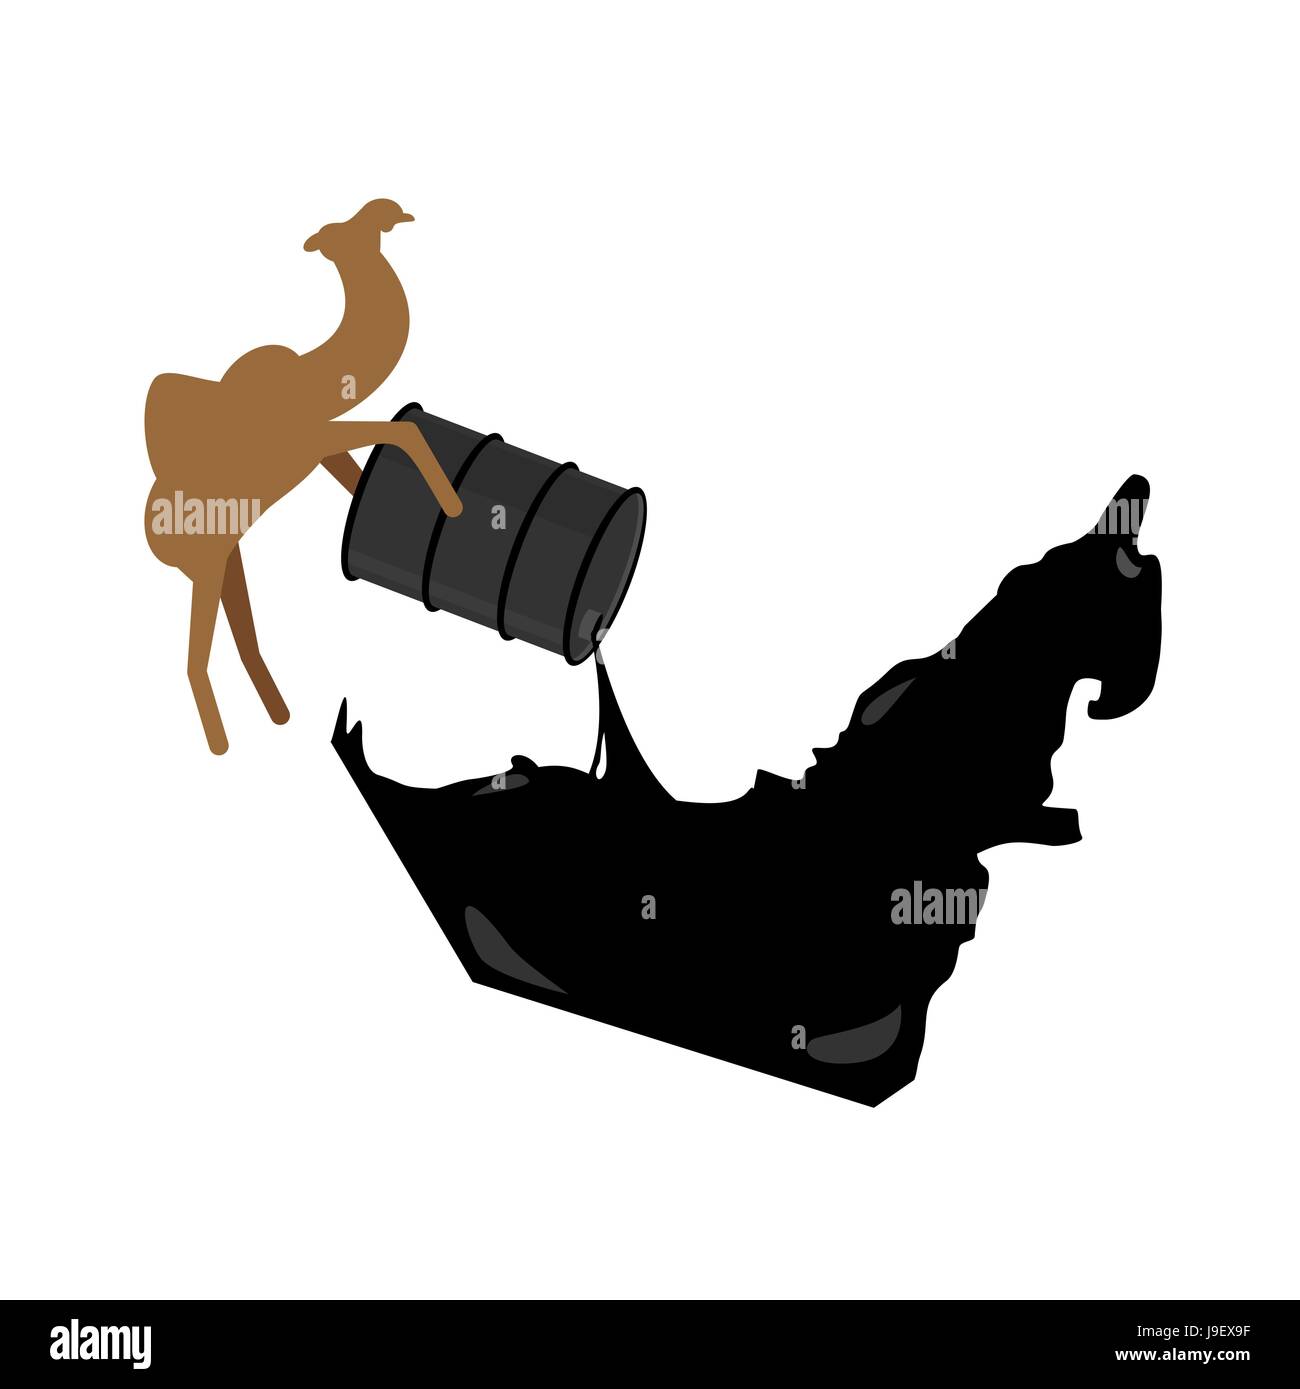 United Arab Emirates map. Camel pours oil from  barrel to UAE  map. Vector illustration Stock Vector